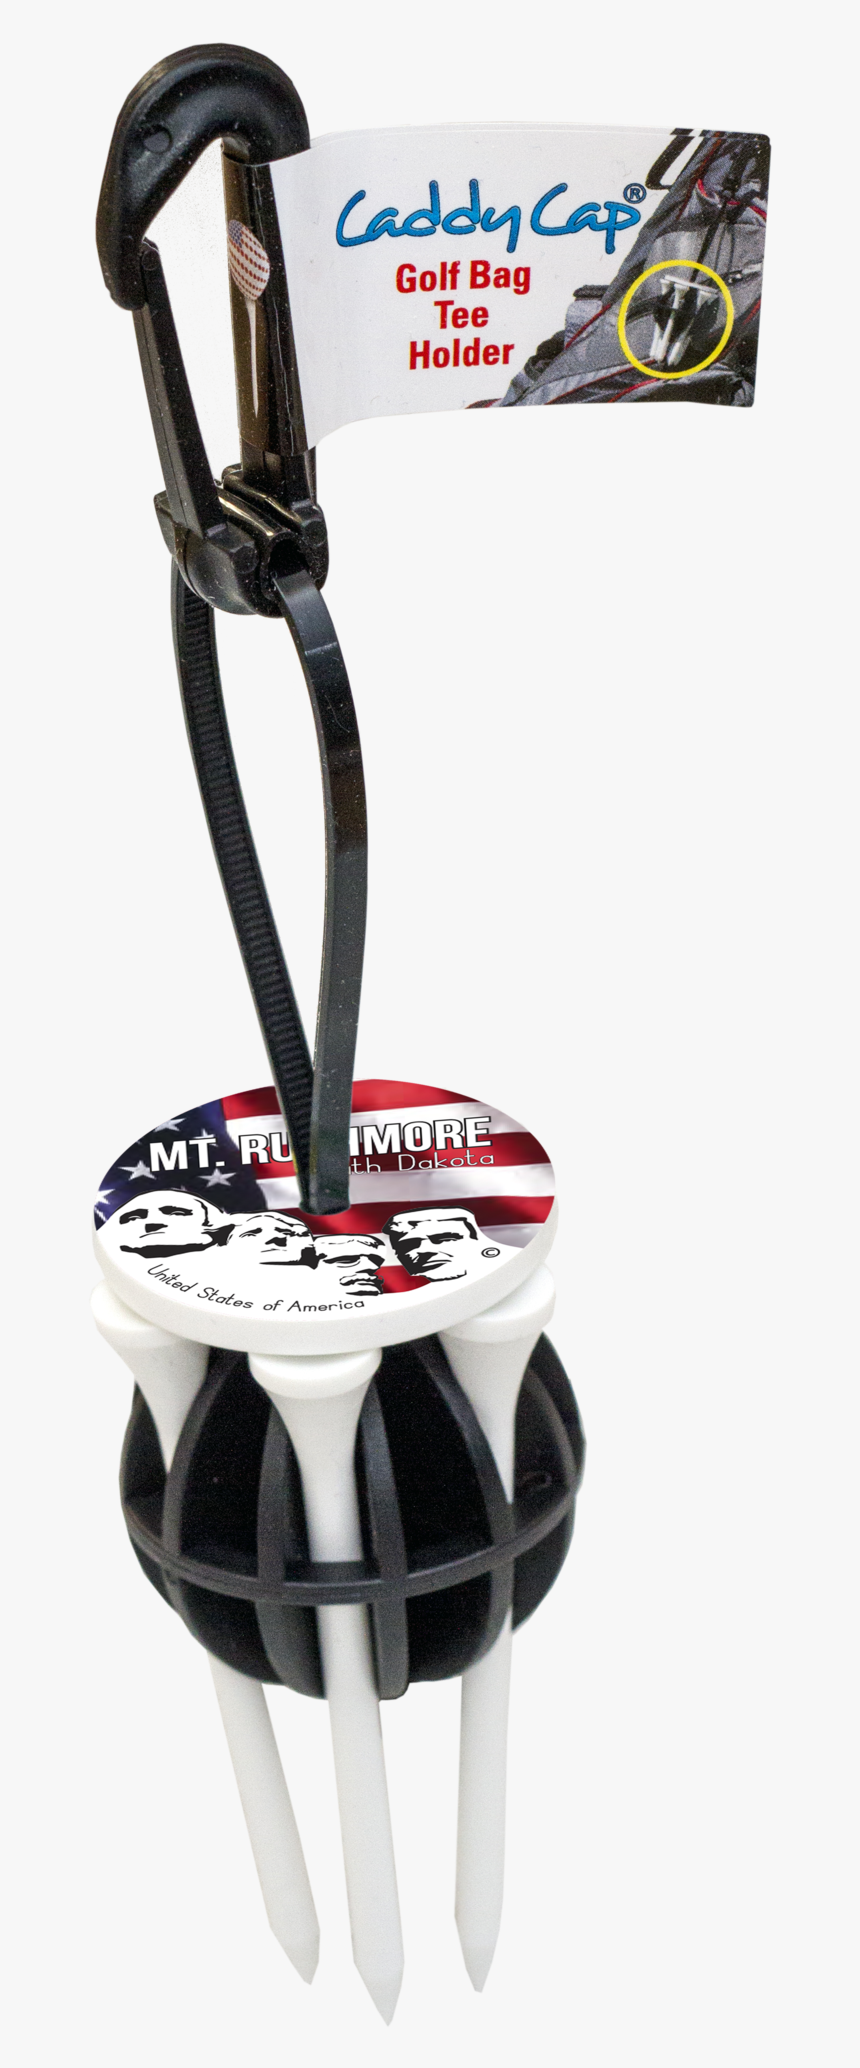 Rushmore Golf Bag Accessories - Best Golf Bag Accessories, HD Png Download, Free Download